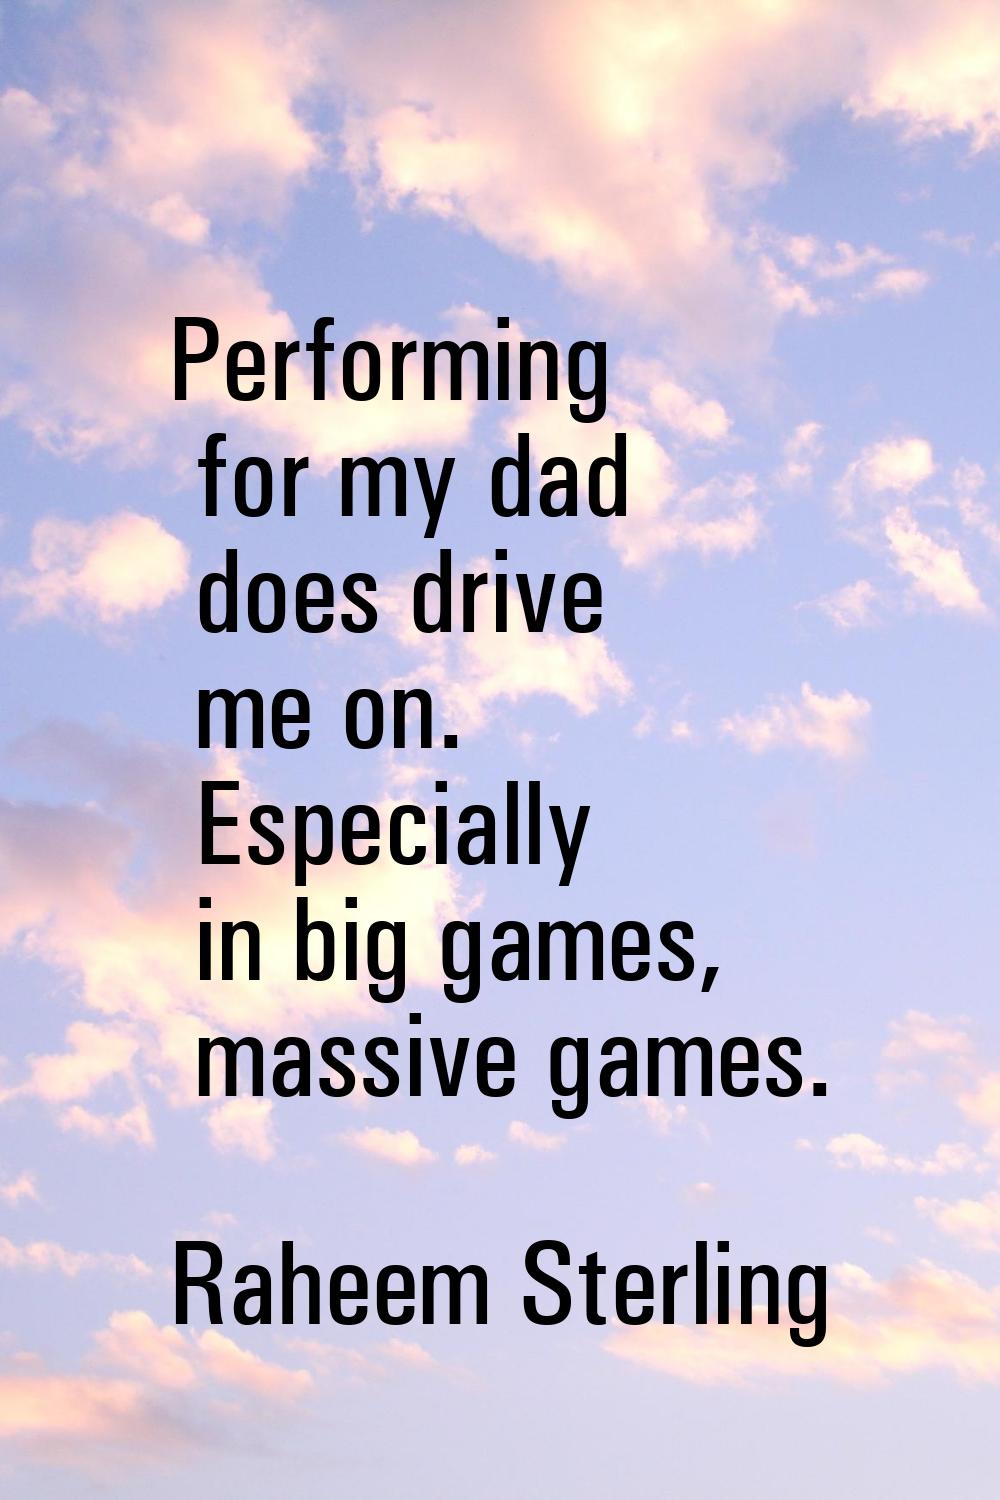 Performing for my dad does drive me on. Especially in big games, massive games.